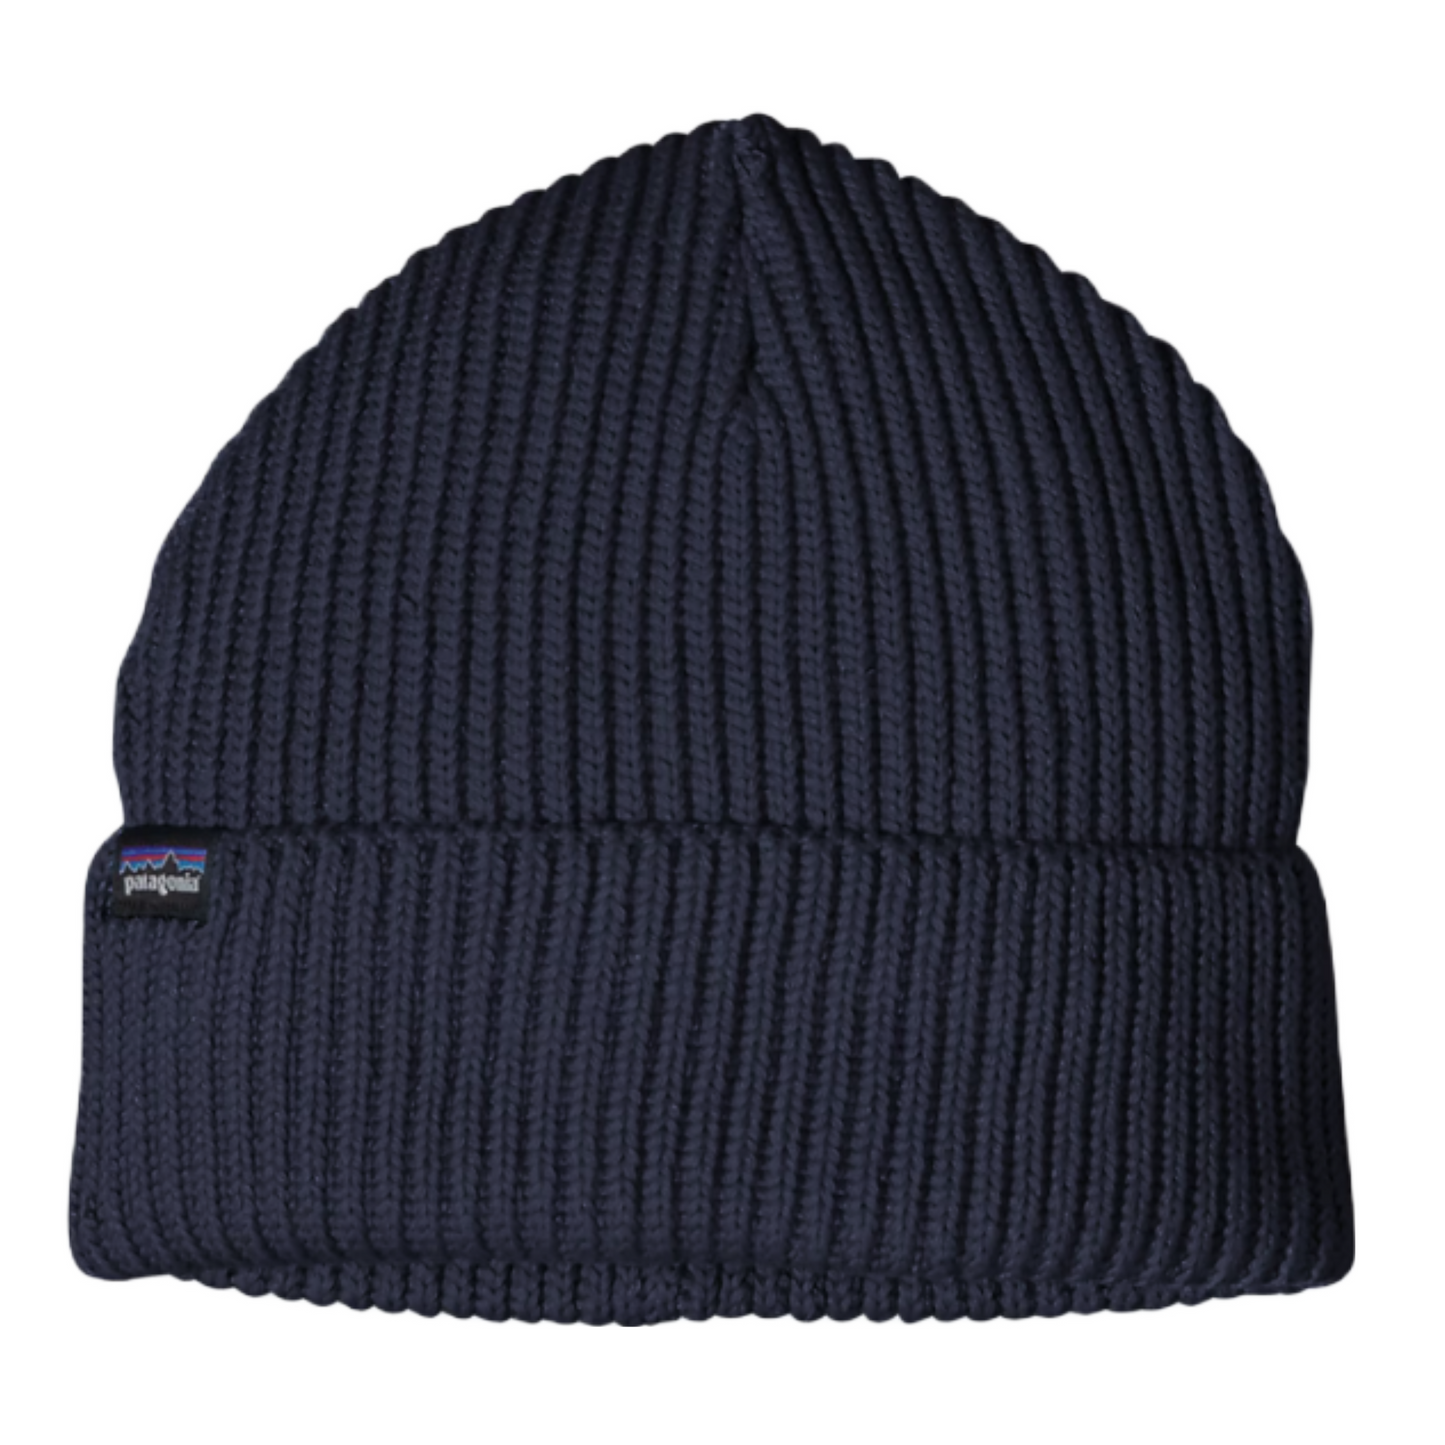 Patagonia Fishermans Rolled Beanie in Navy blue